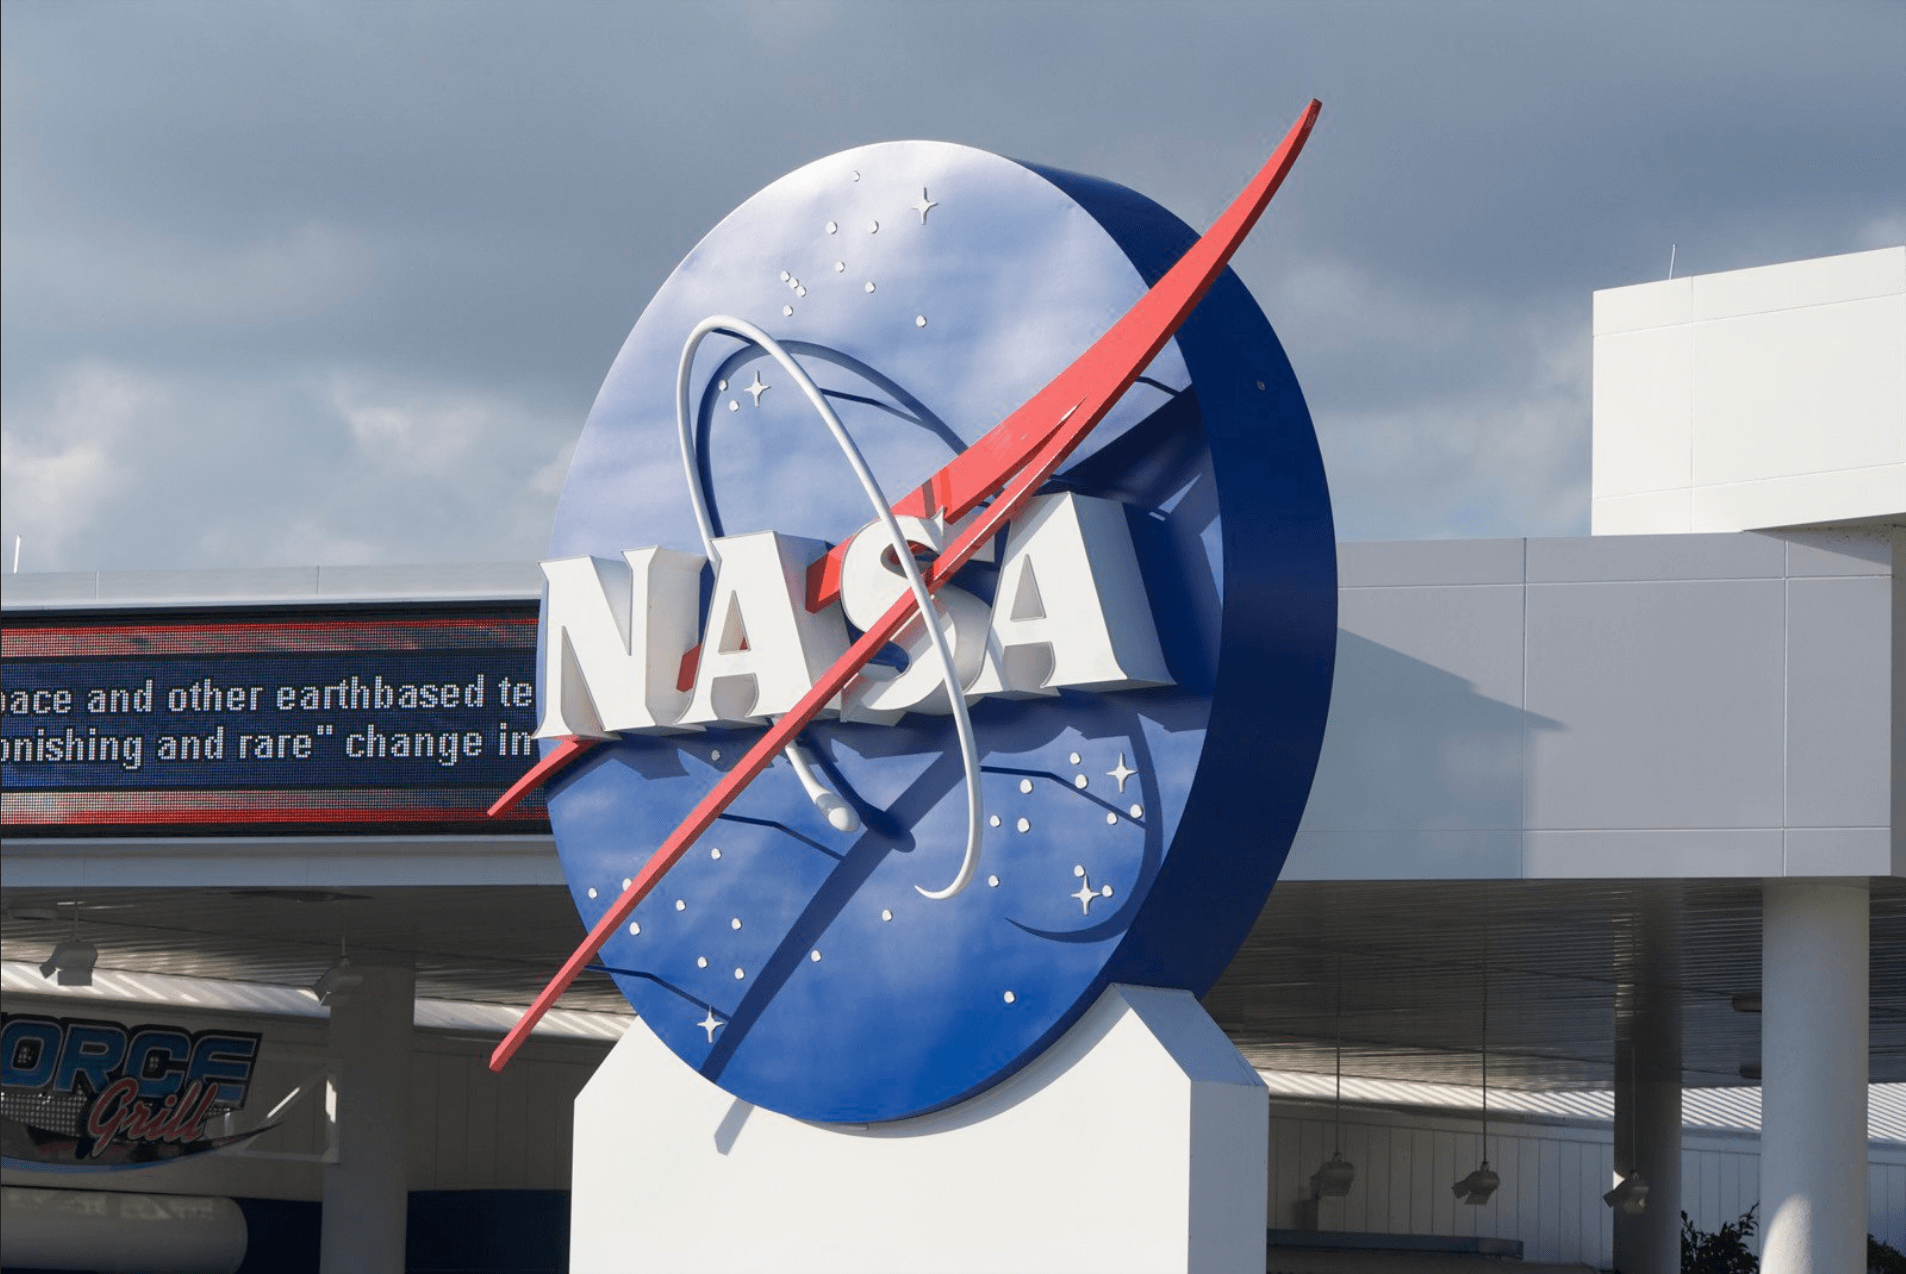 NASA utilizes the sound of the solar system to create music